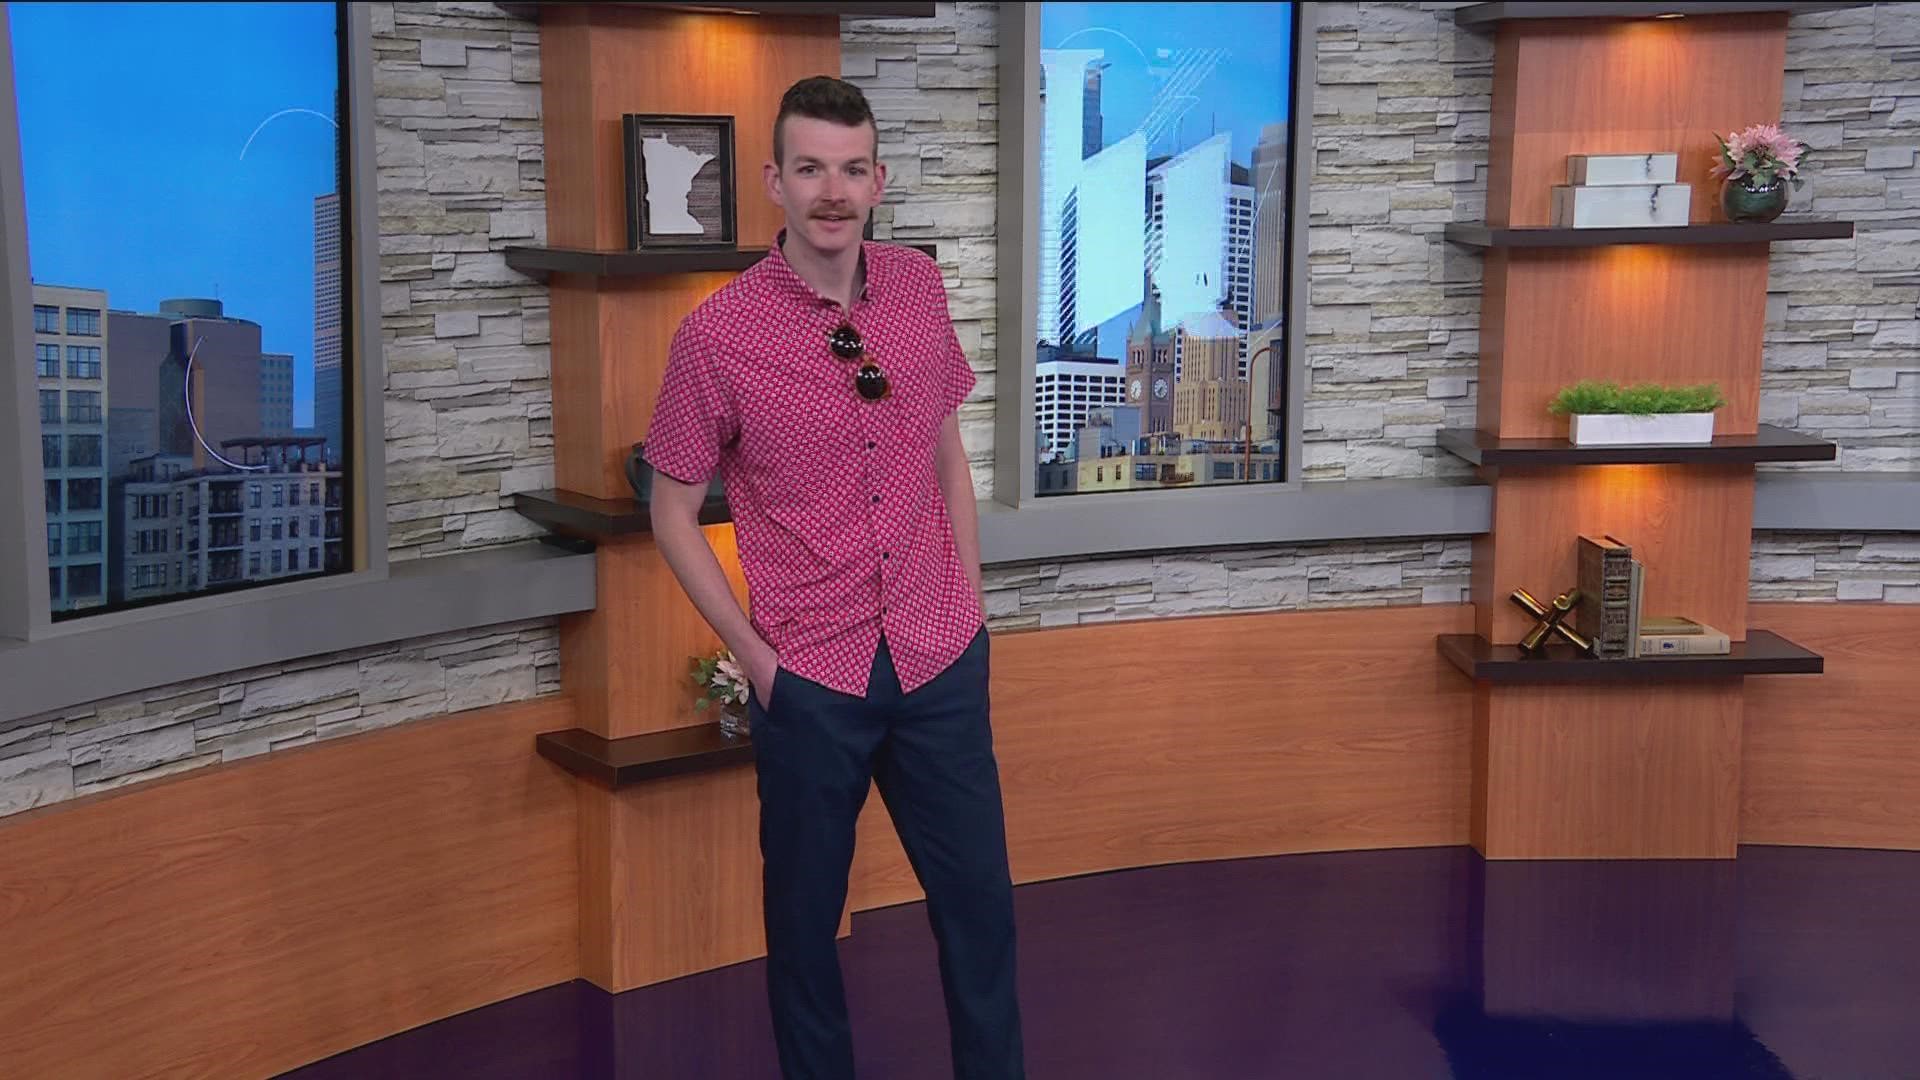 Four models from Scheels, Mizzen & Main, Under Armor, Free People and Tribal appeared on KARE 11 Saturday to showcase some of the latest summer fashions and styles.